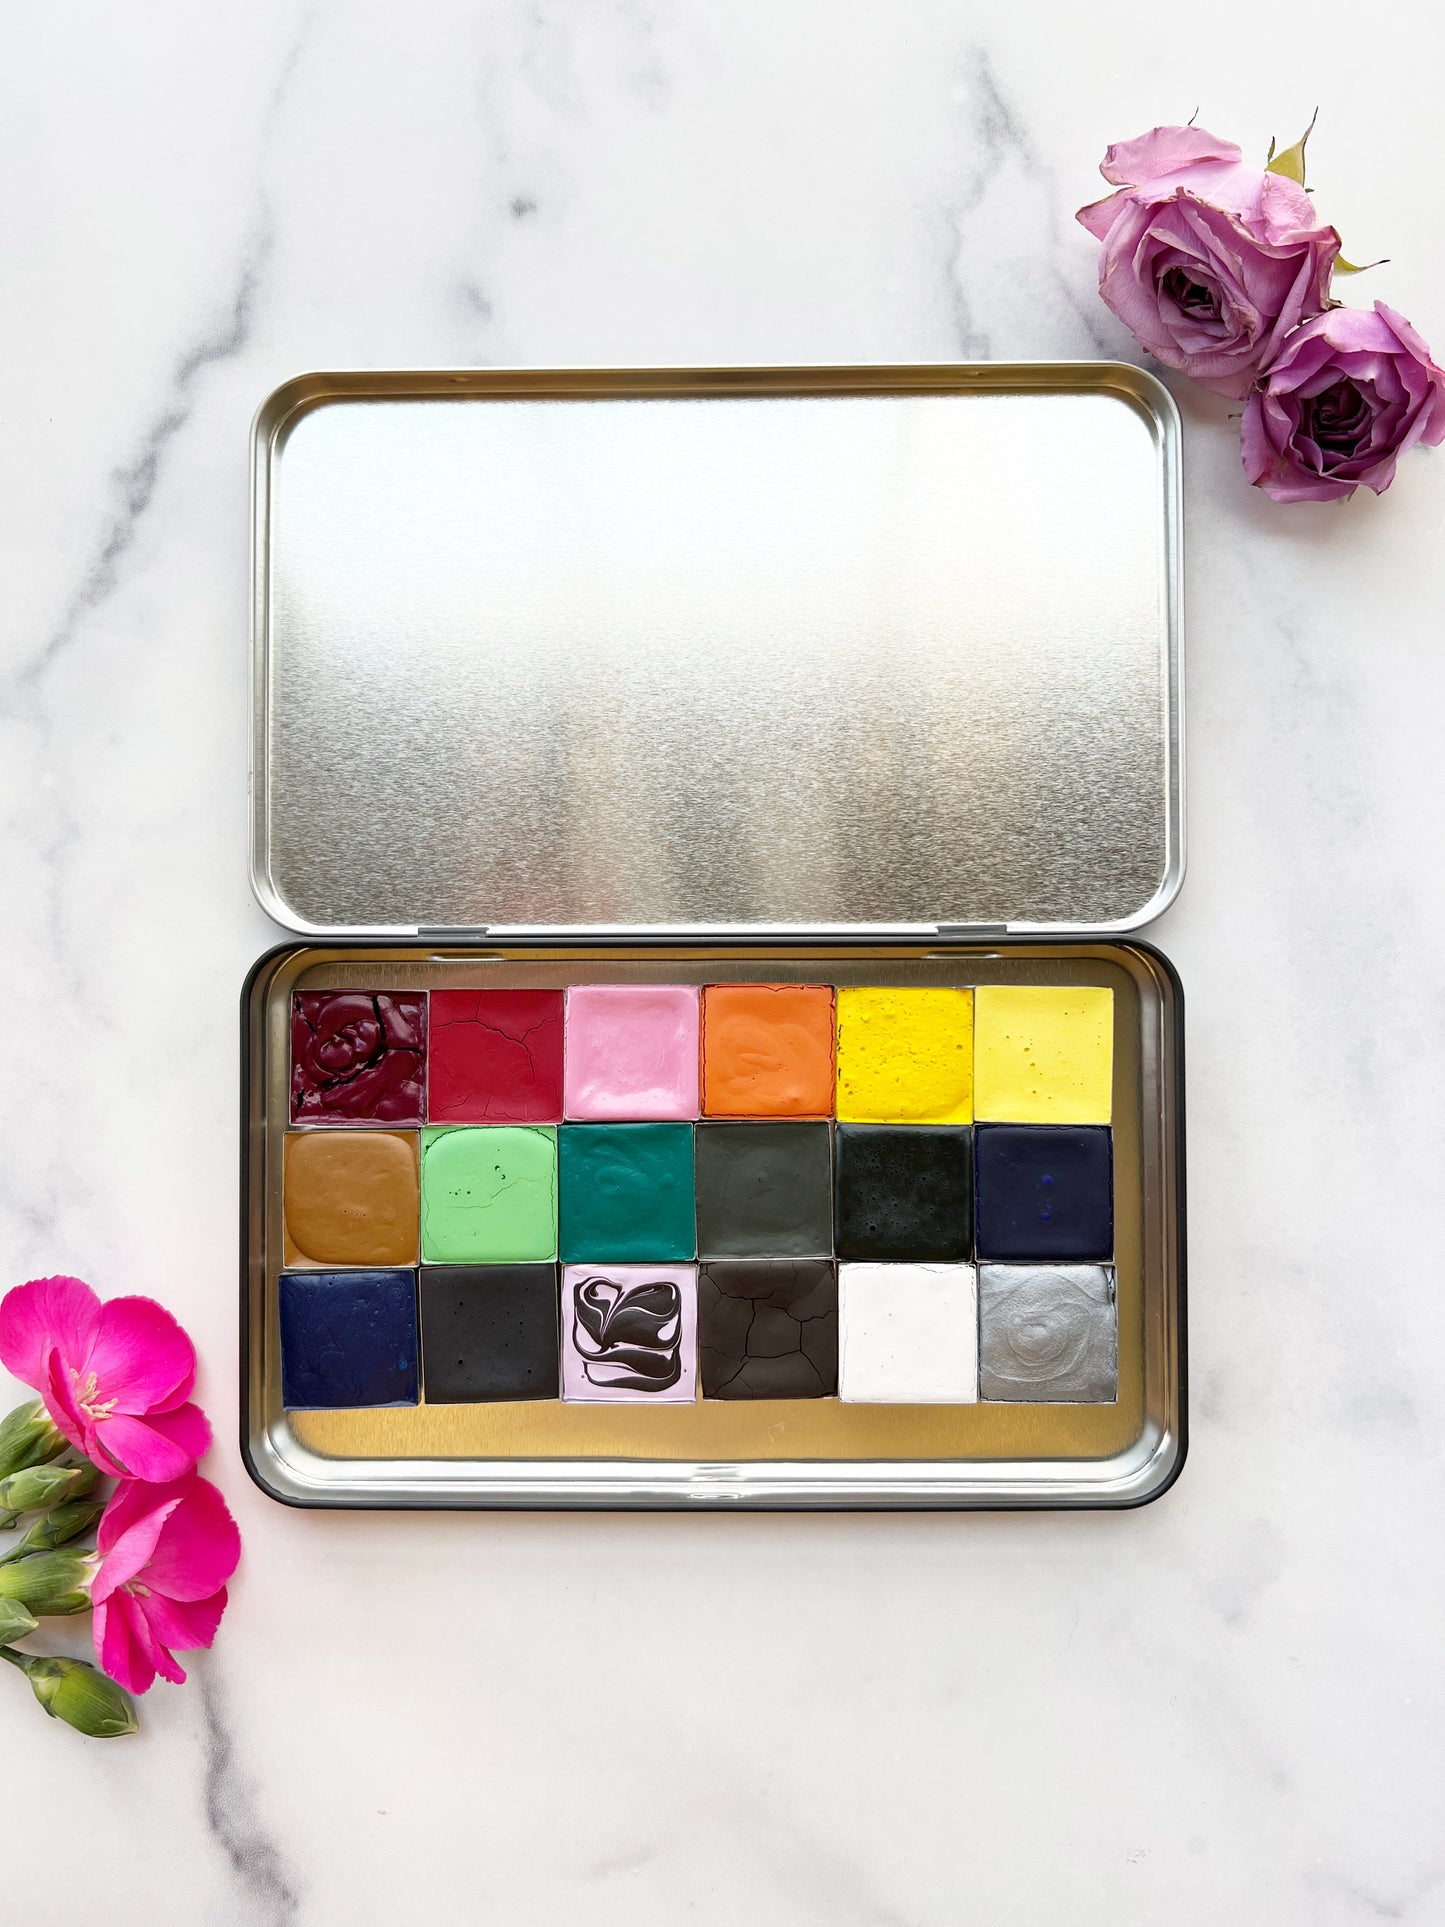 The Flower Painter's Set, 18 square pans of watercolor paint in a black tin